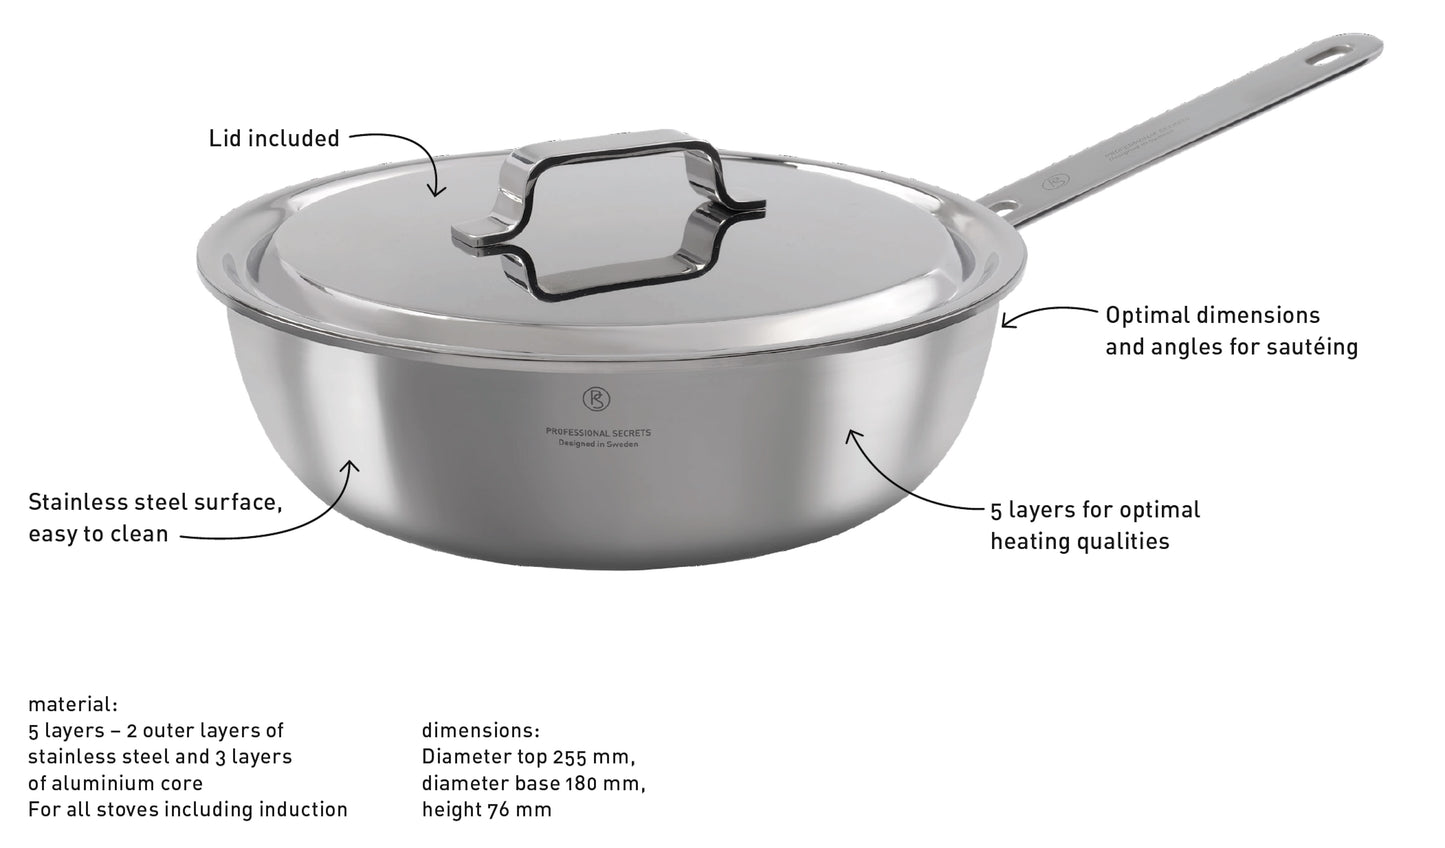 Professional Secrets Designed in Sweden Cooking Pot - Stainless Steel Stackable Saucepan with Lid - Large (6.3 qt)